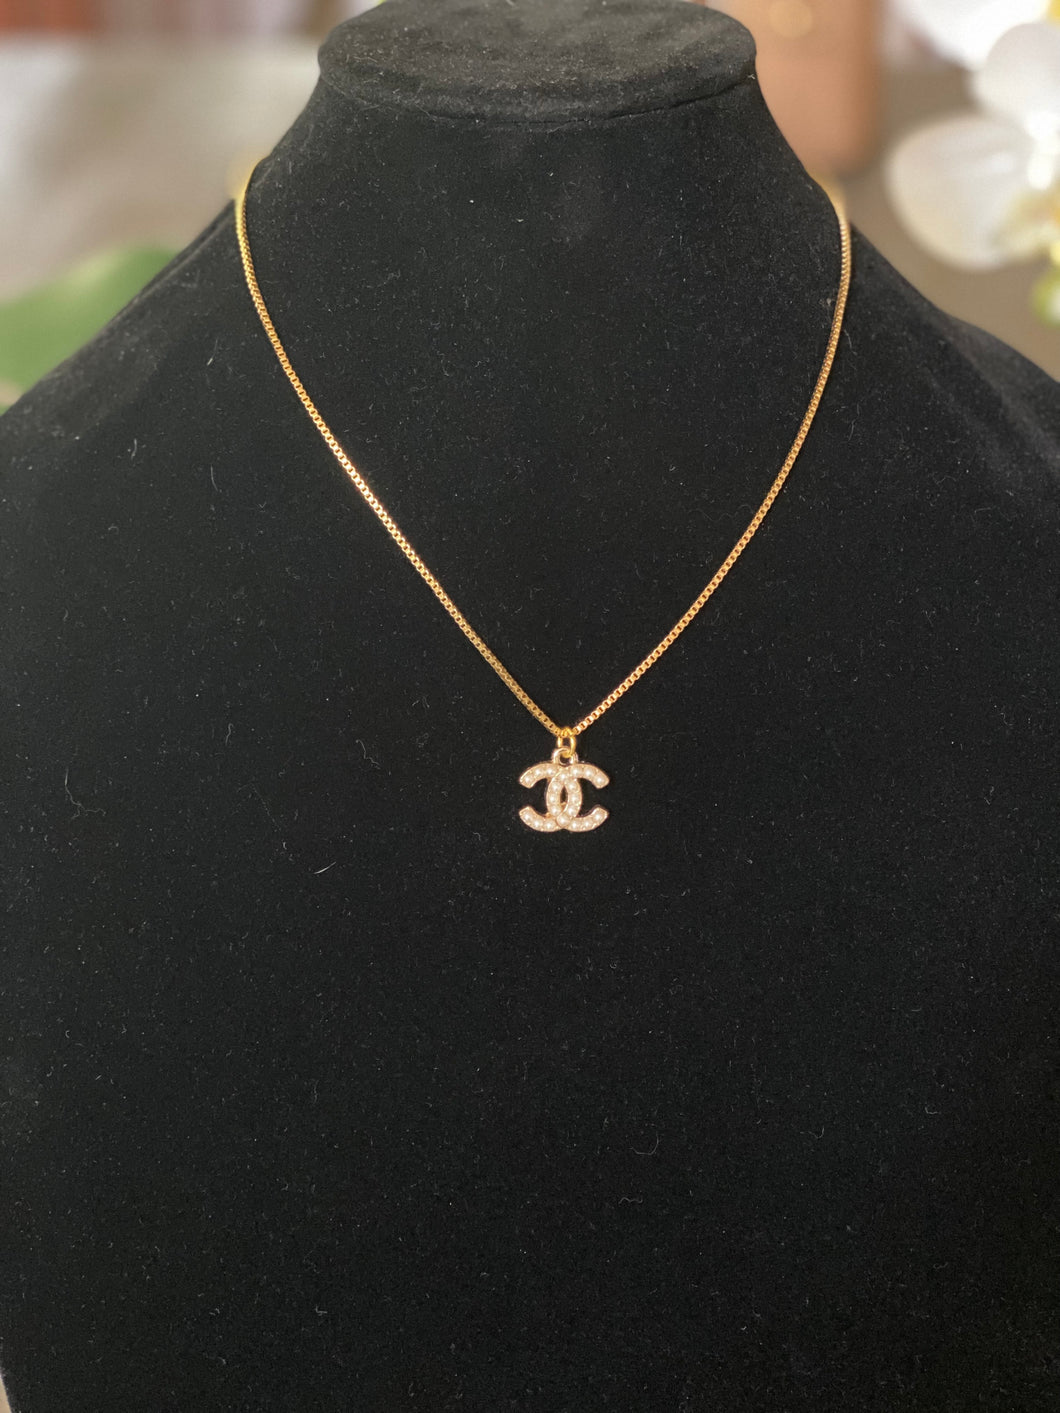 CC Pendant Necklace with Gold Tone Chain